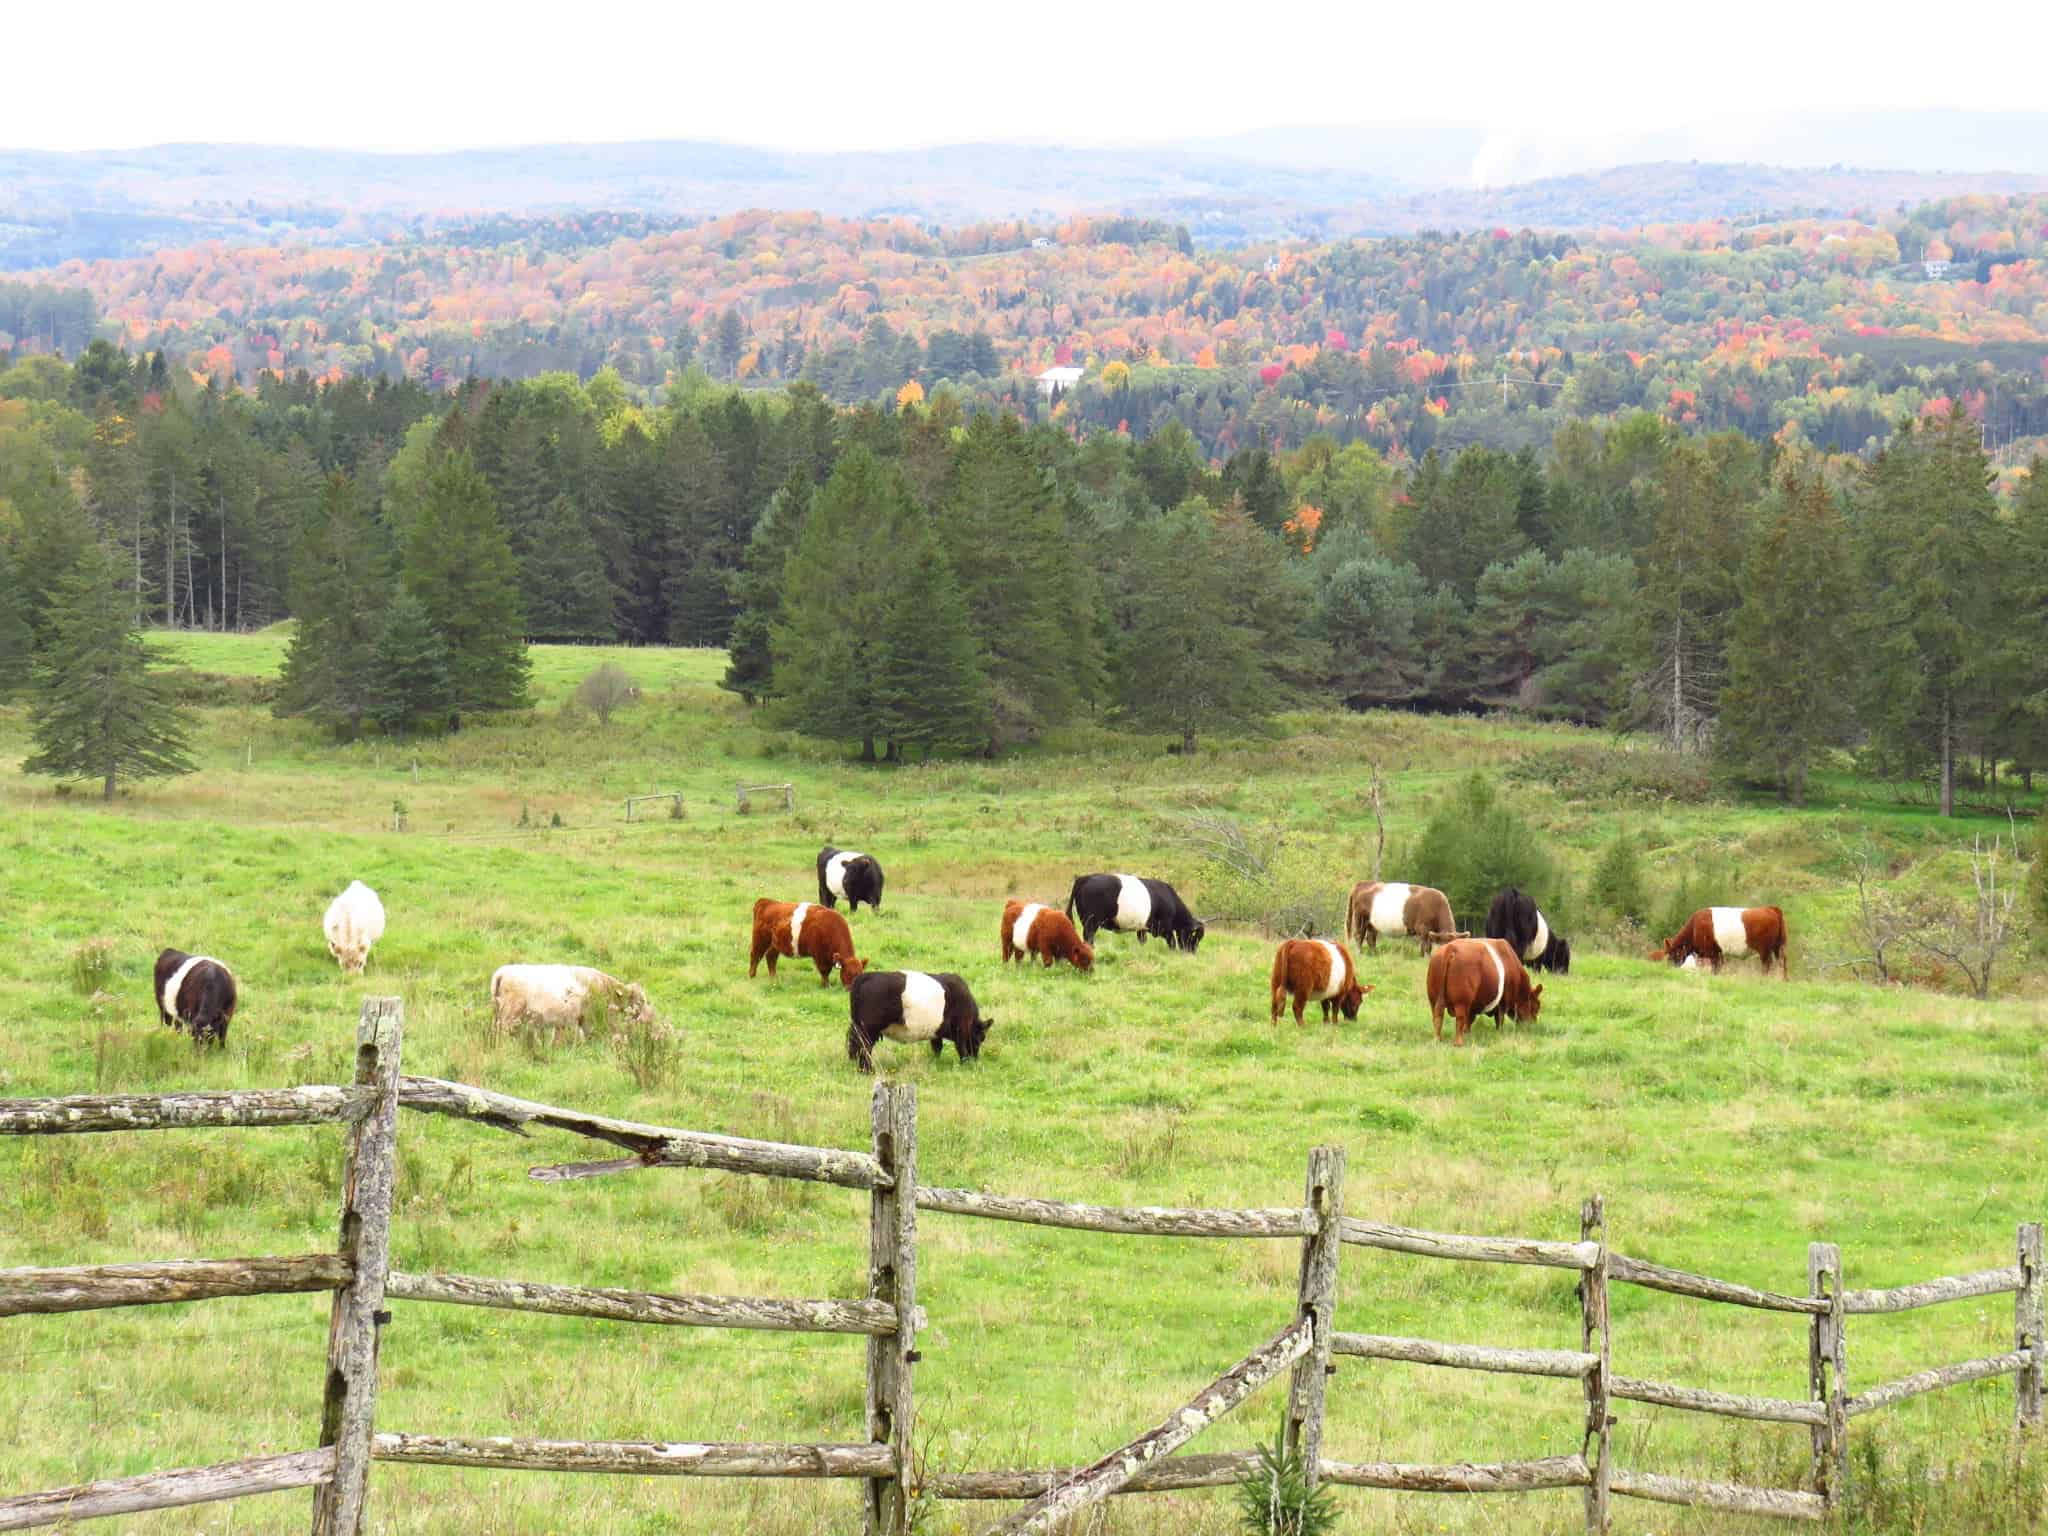 Burke Area CoC - Cows in a Pasture during Foliage